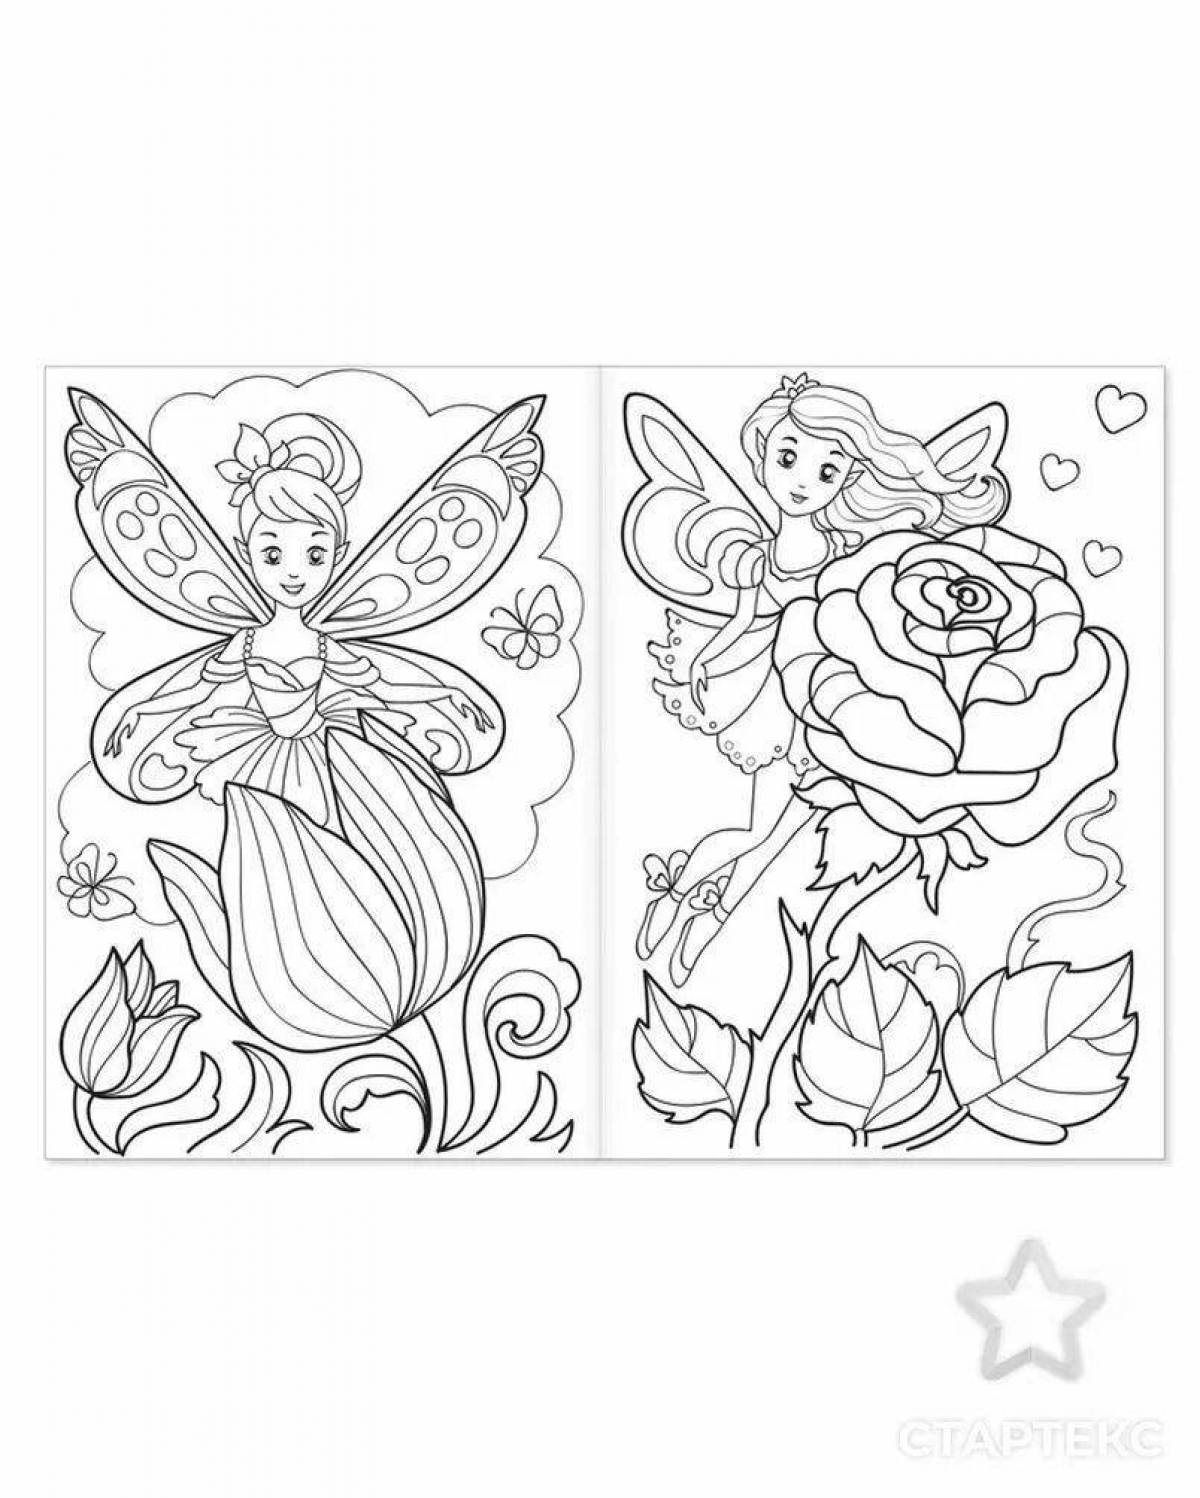 Glowing flower fairy coloring pages